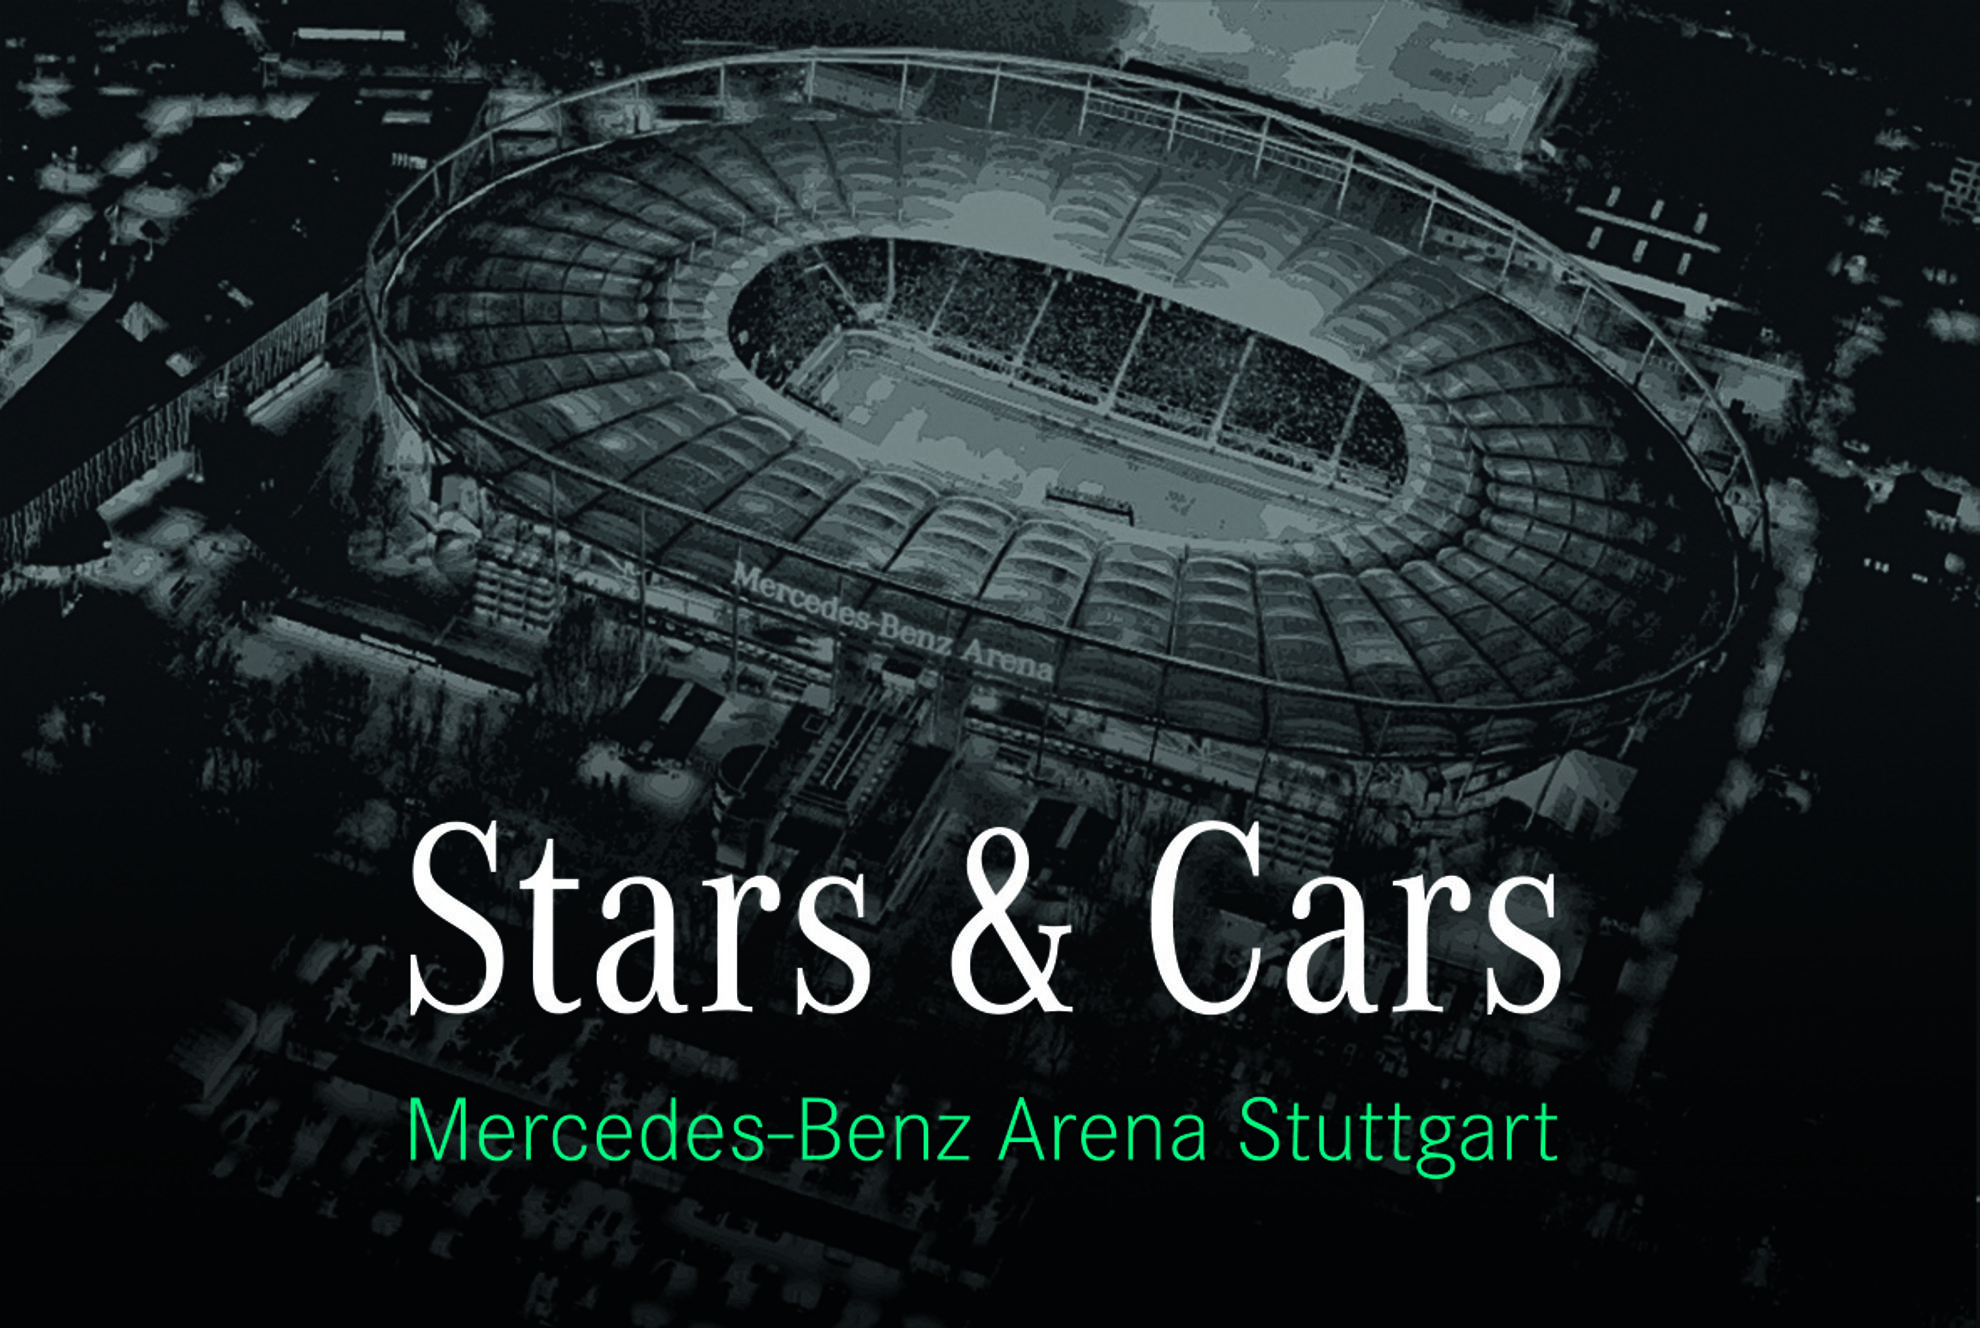 Every 2015 Mercedes-Benz racing champion at Stars & Cars in Stuttgart